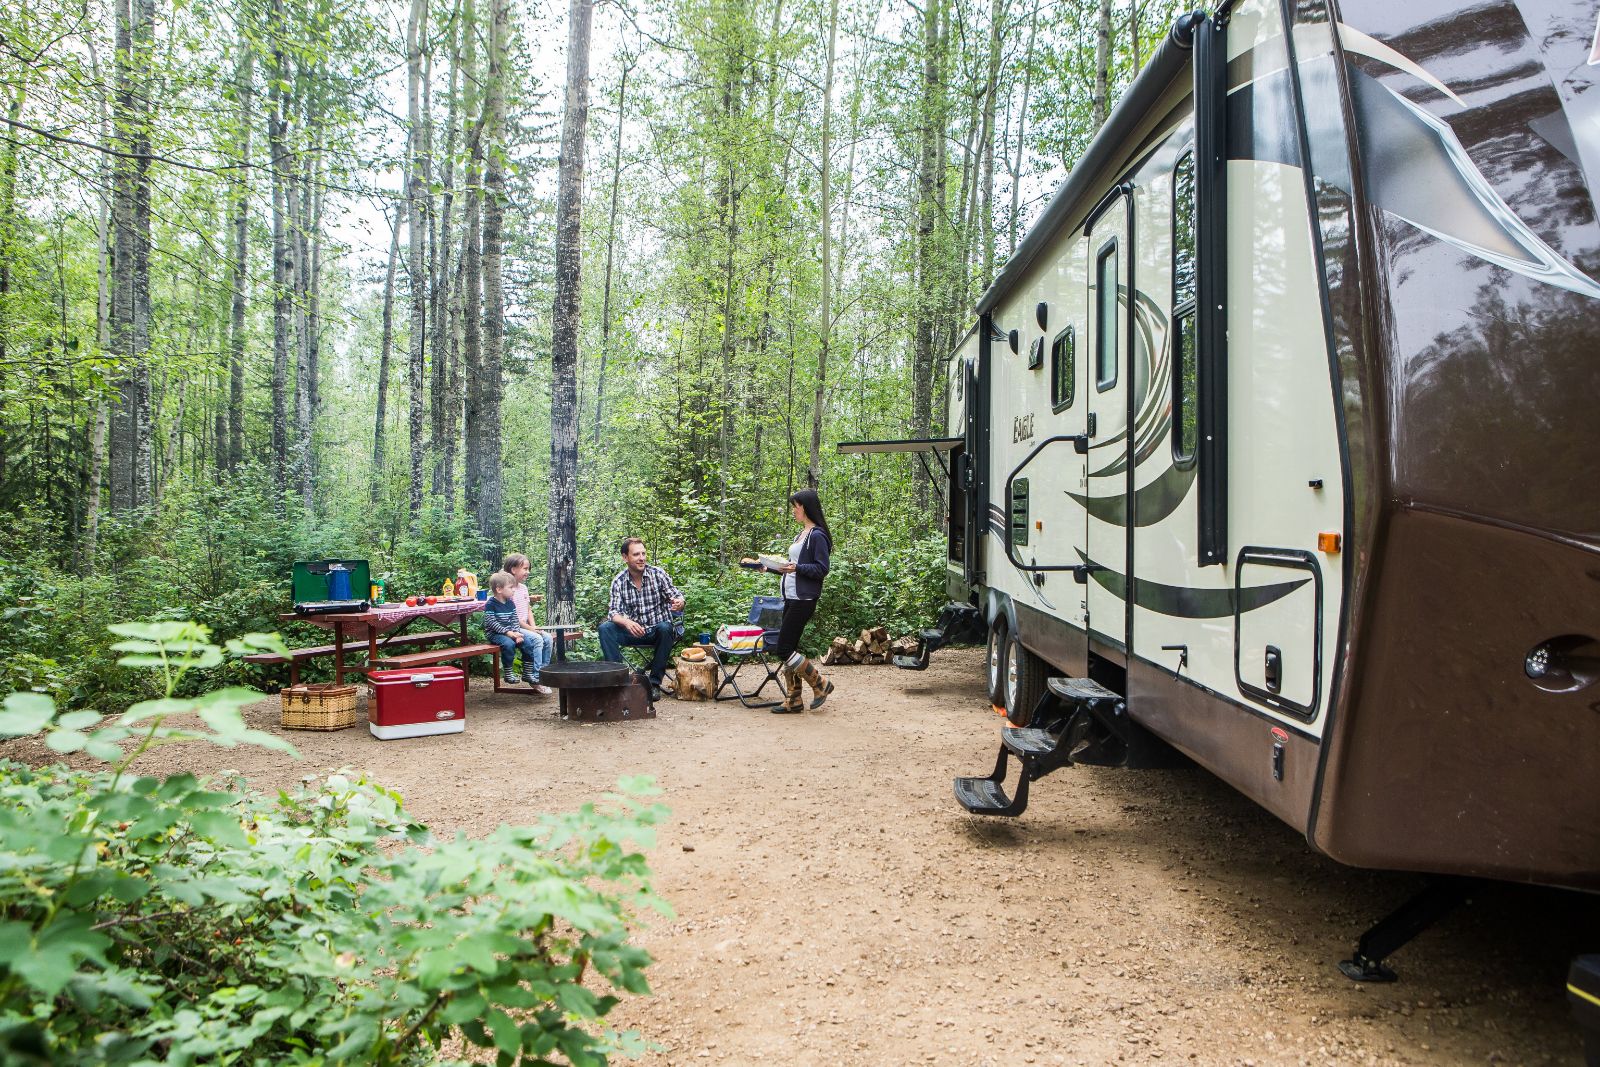 An RV camper at a campground in the Slave Lake Region of Northern Alberta, with a family sitting in camping chairs around a campfire between the trees